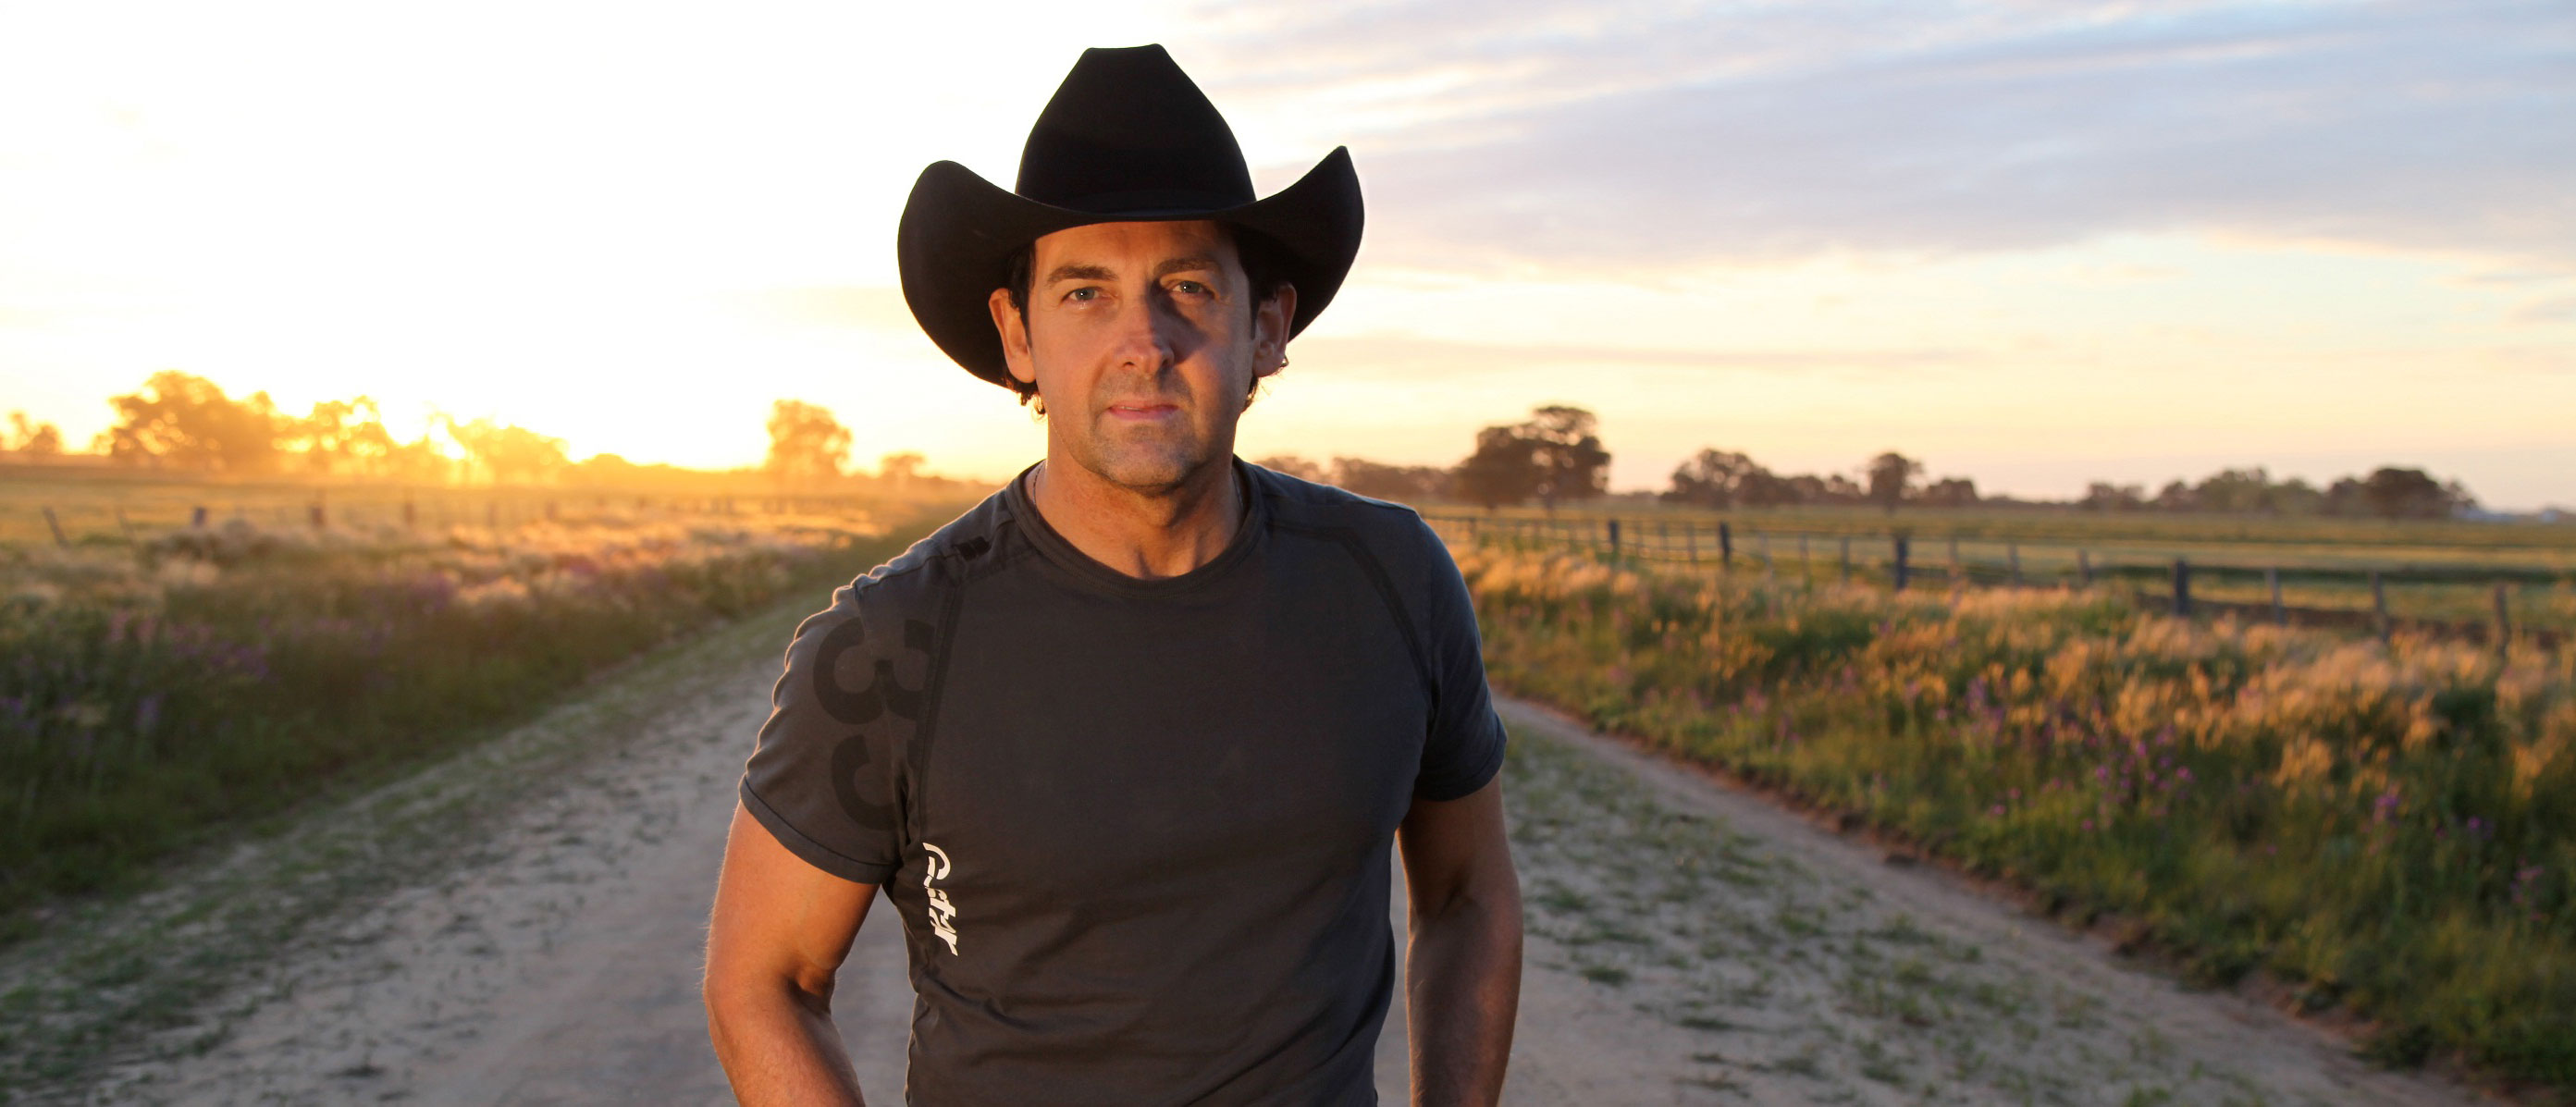 Lee Kernaghan and producer Garth Porter unveil ANZAC album project